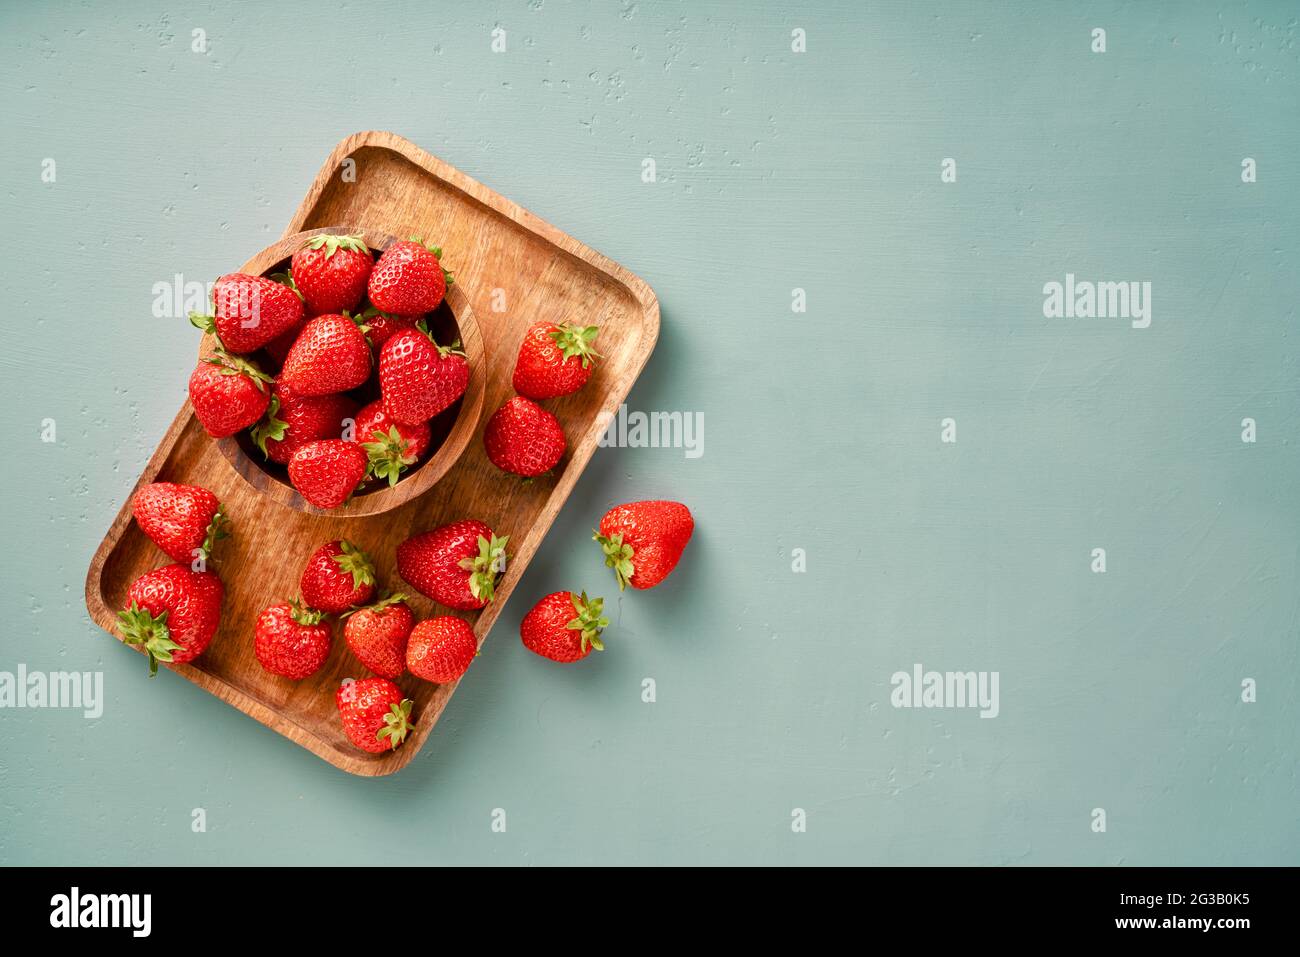 Fresh strawberry on a blue background. Strawberries with leaves on wooden plate. Stock Photo